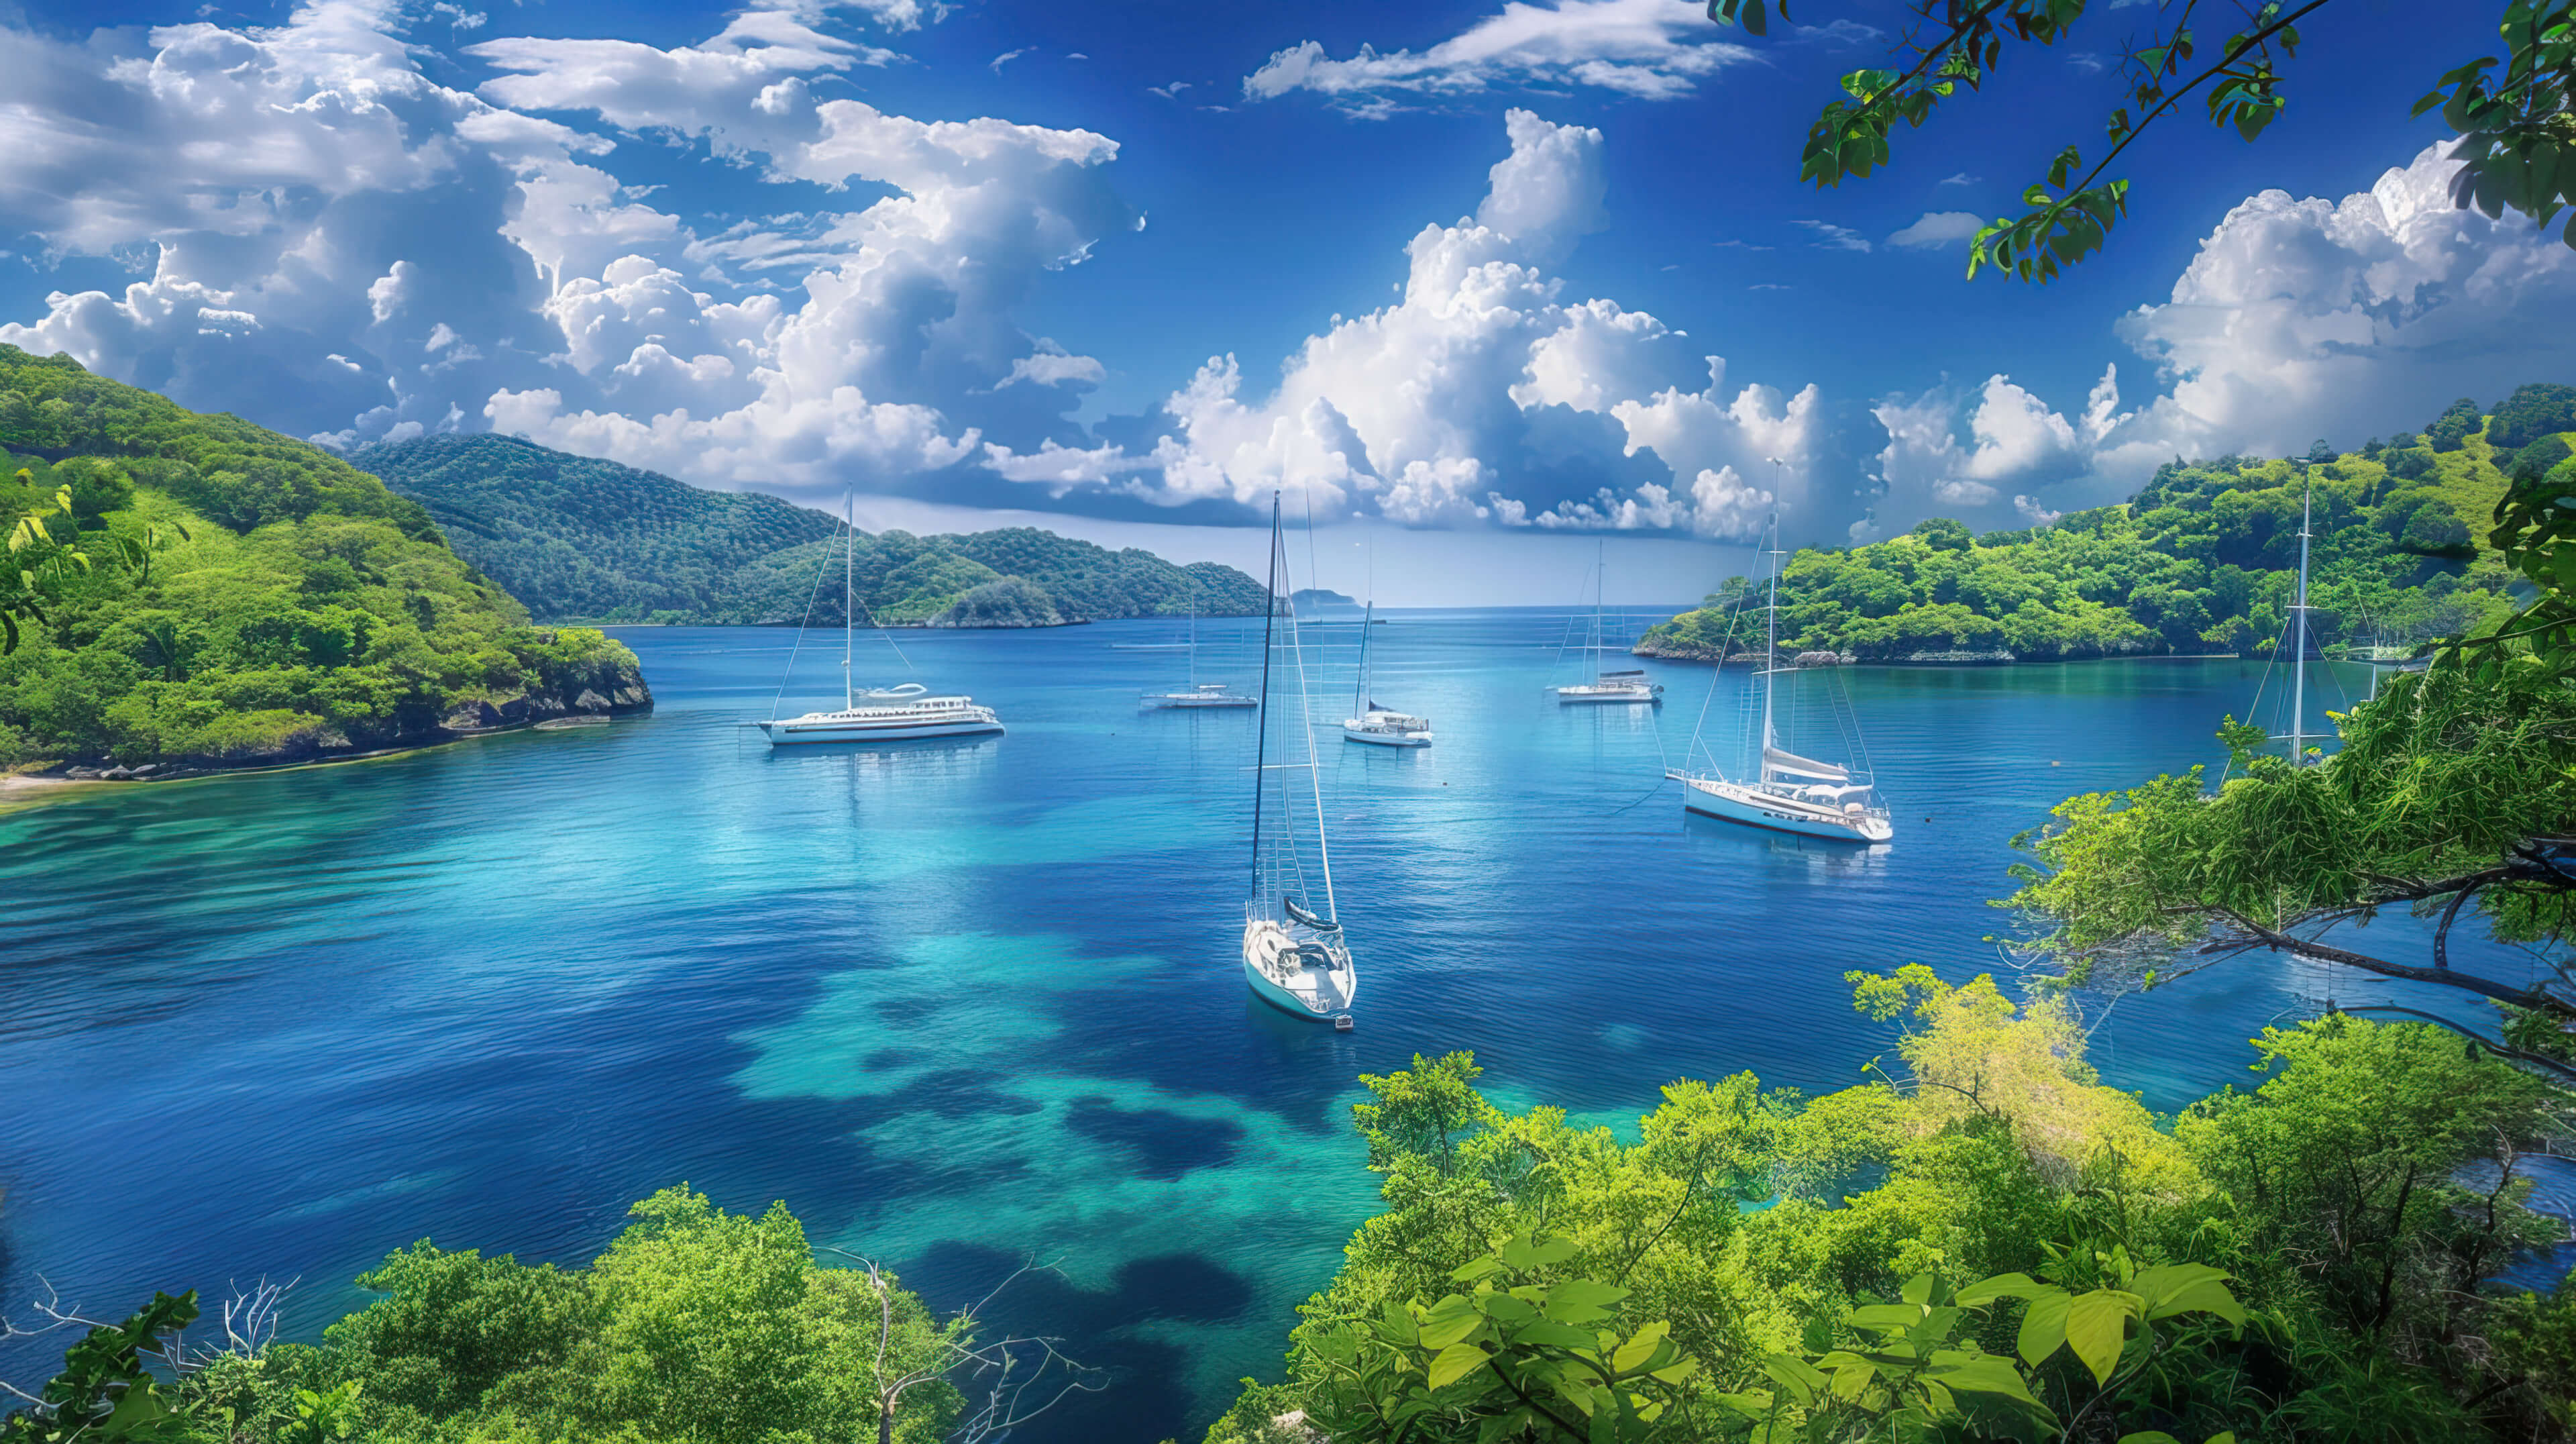 A tranquil bay dotted with sailboats at anchor, their masts standing tall against a backdrop of lush green hills and clear blue waters